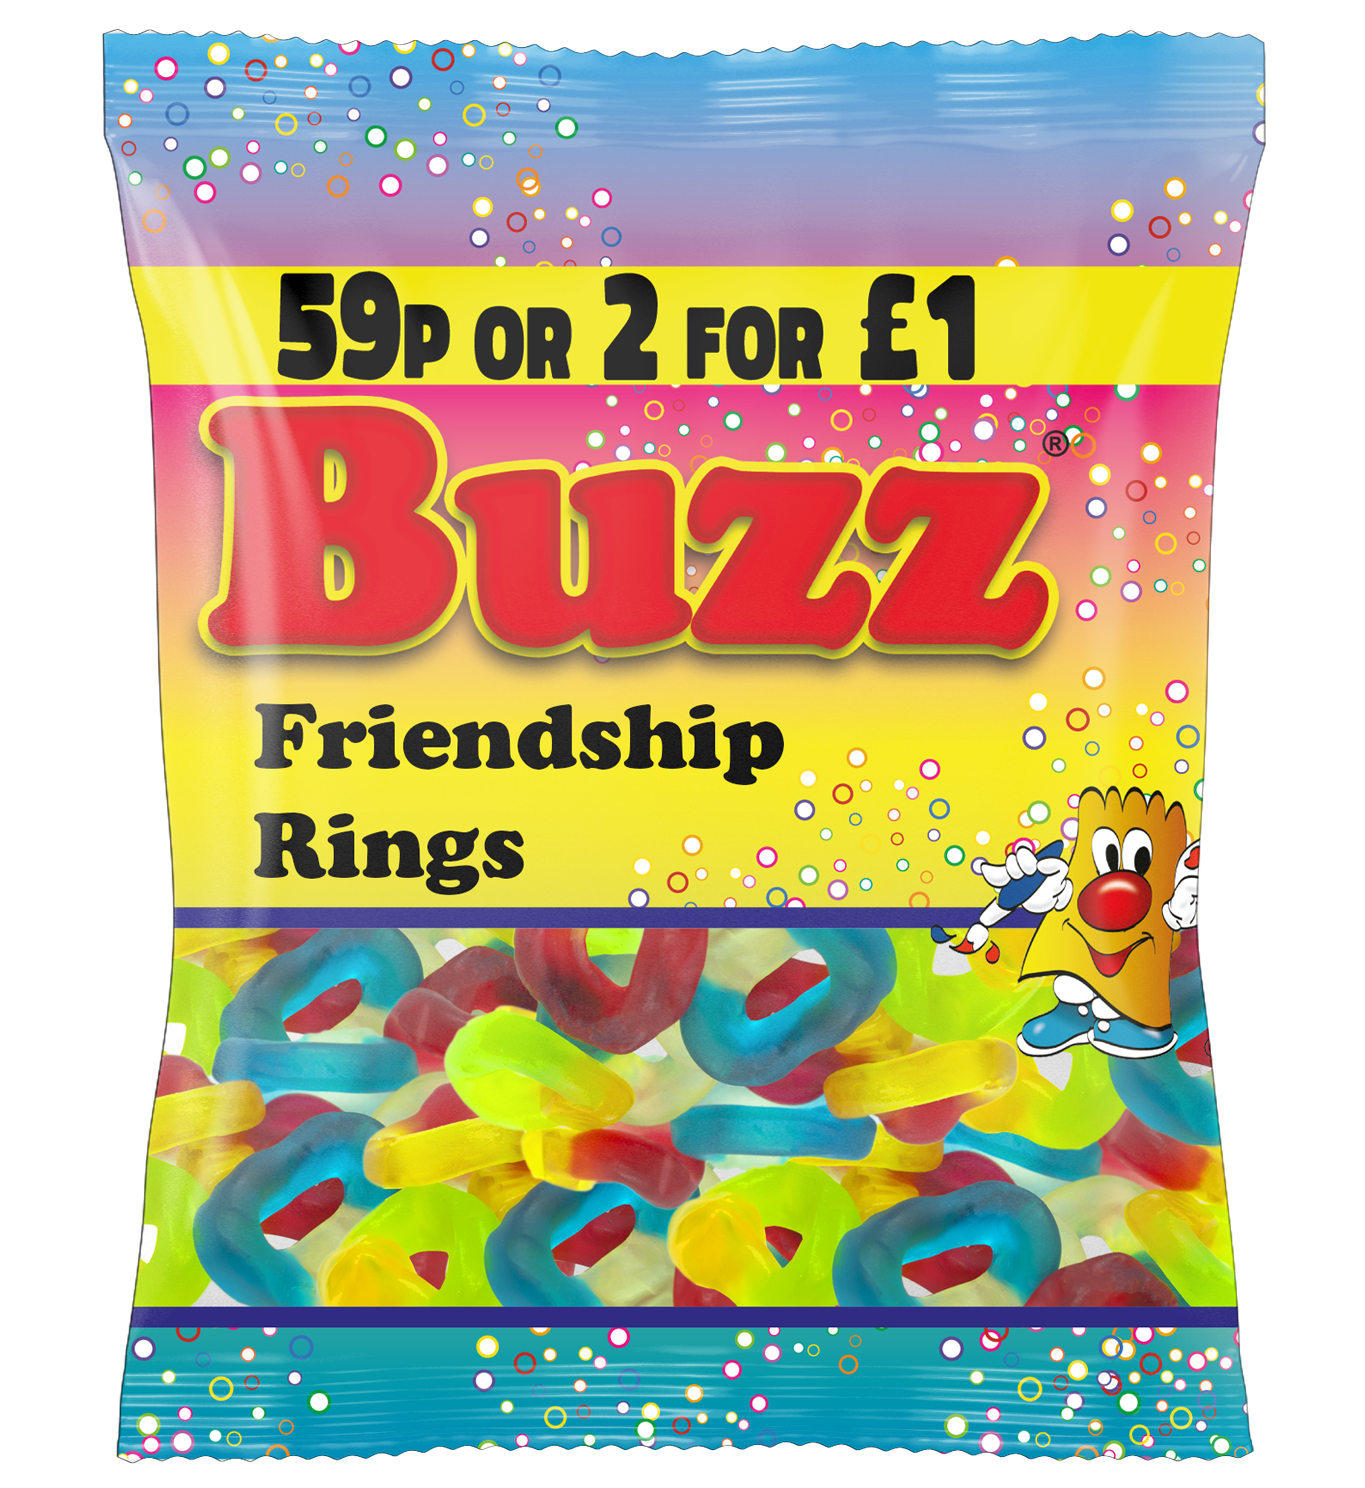 Packet of 59p Gummy Friendship Rings by Buzz Sweets. Sold as 59p or 2 for £1.